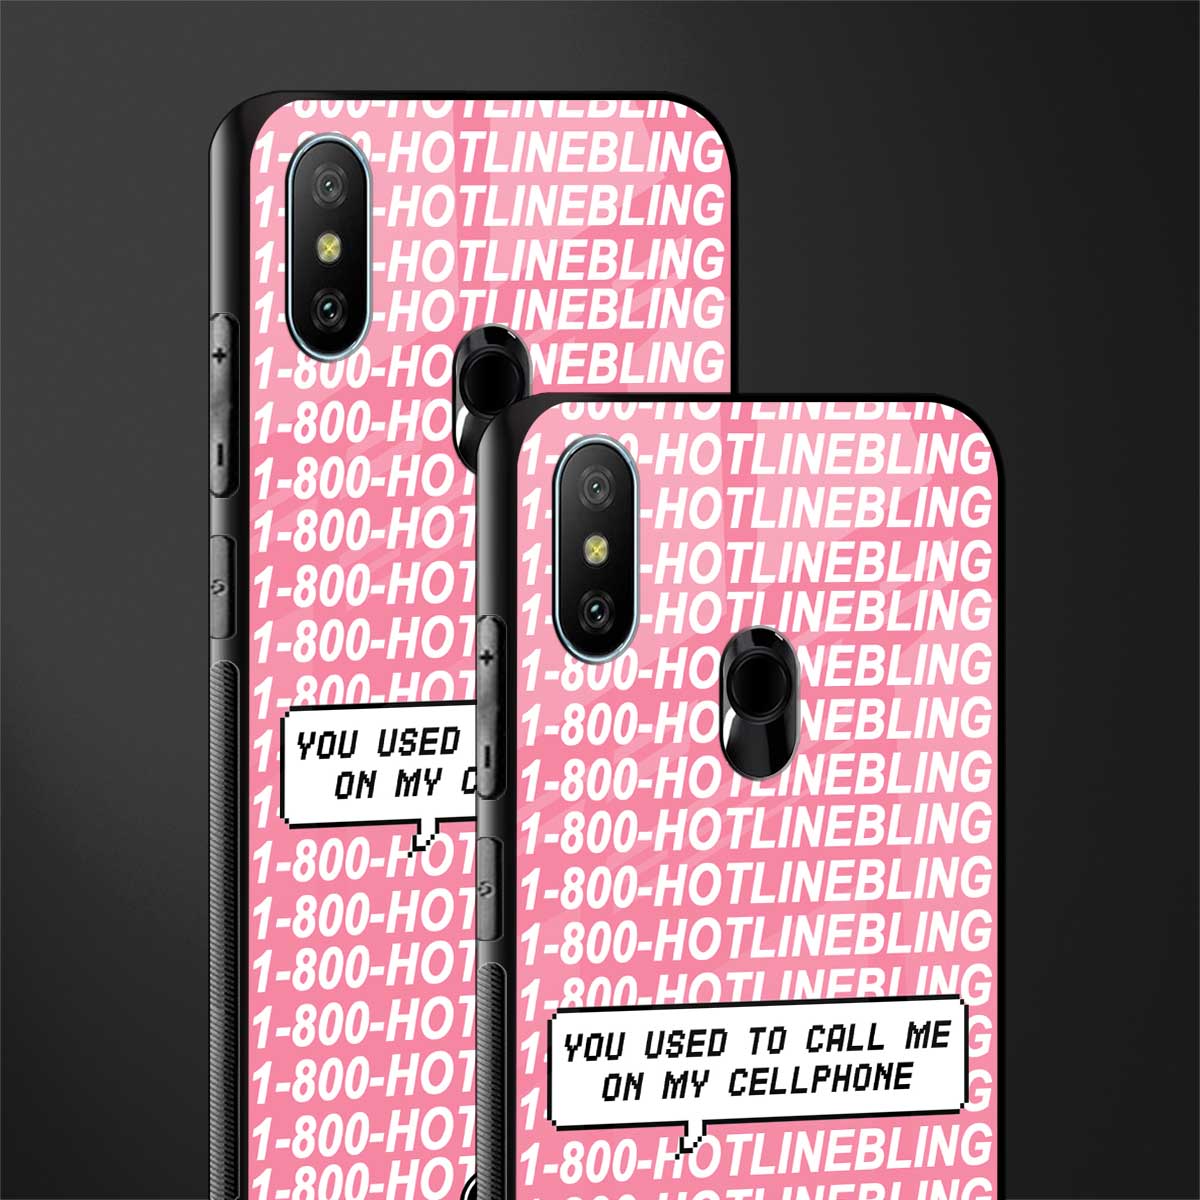 1800 hotline bling phone cover for redmi 6 pro 